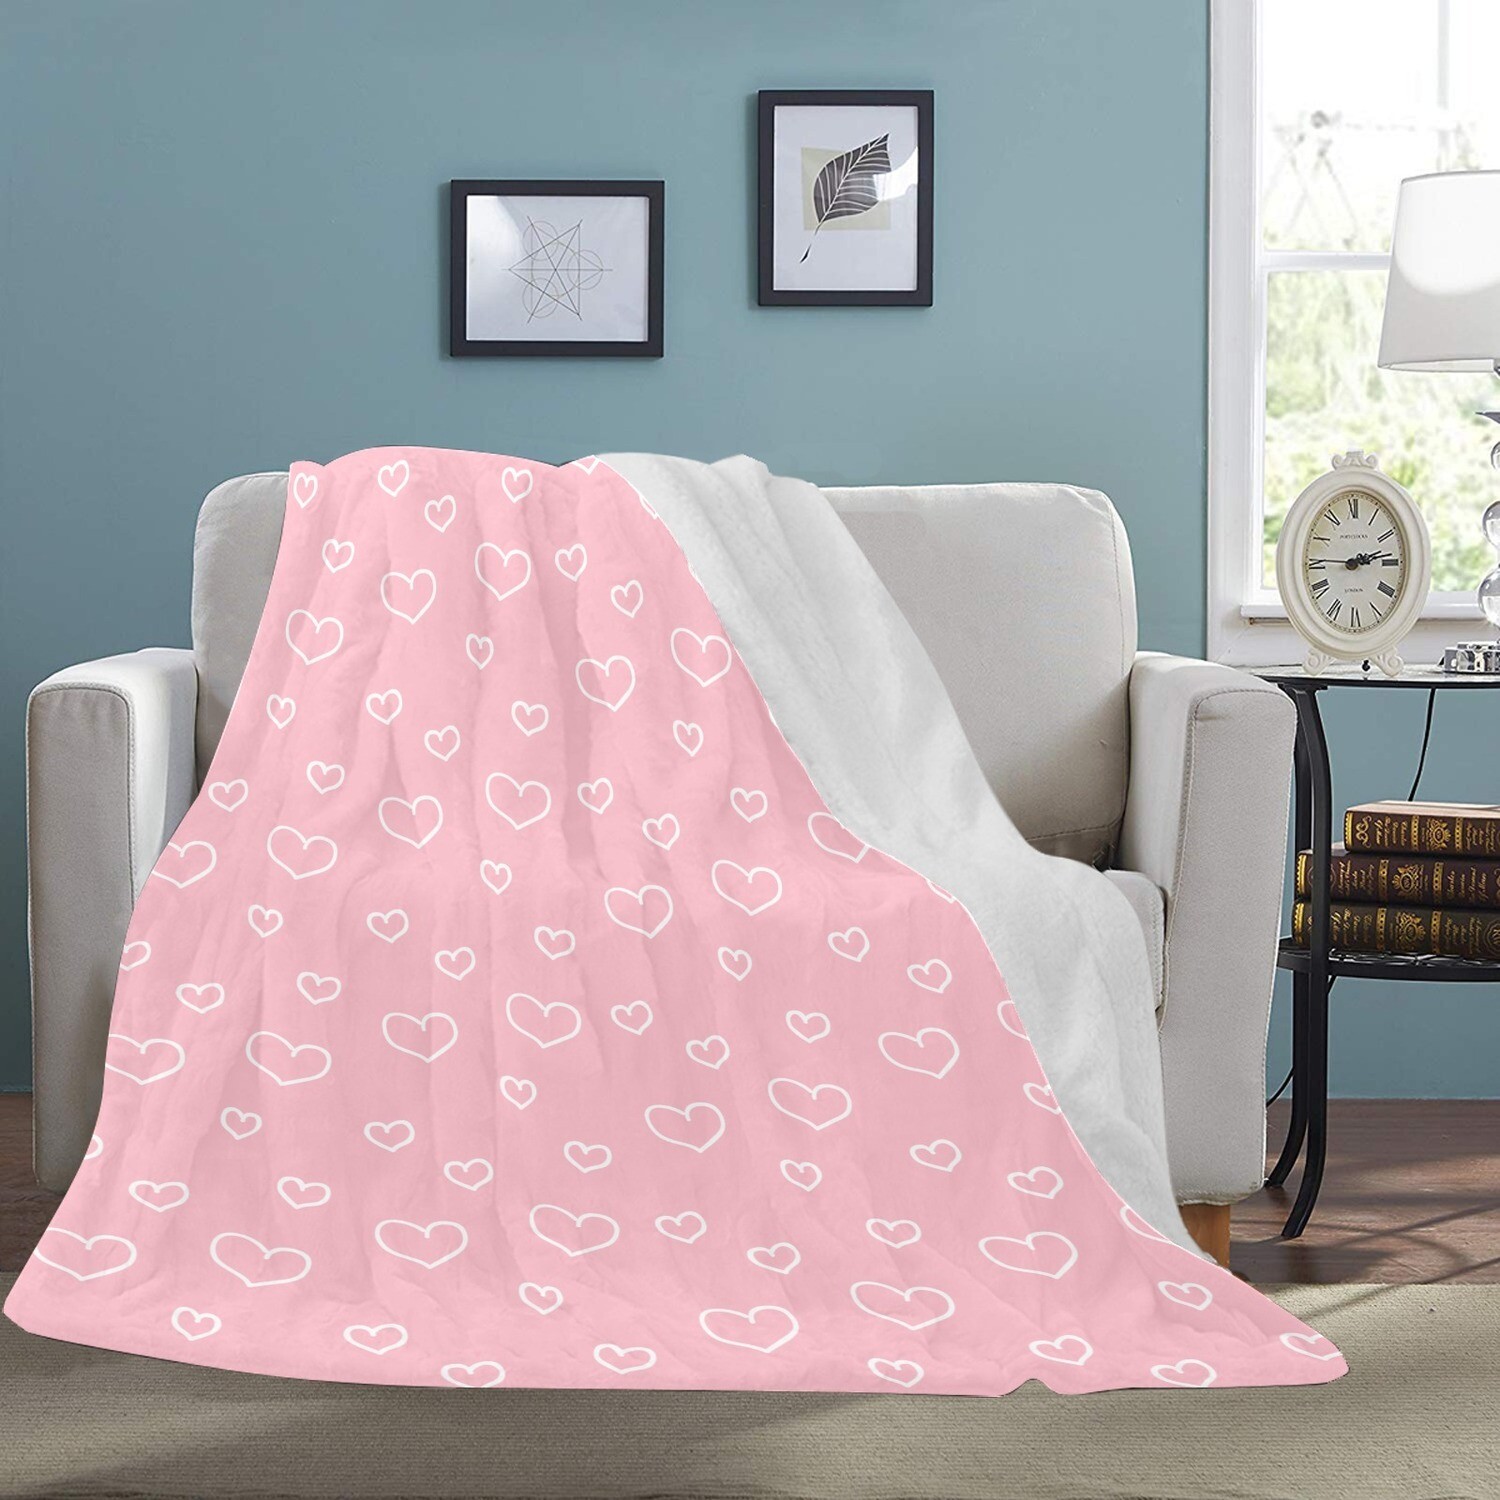 🤴🏽👸🏽💕Large Ultra-Soft Micro Fleece Blanket Valentine white outline hearts on baby pink, gift, gift for her, gift for him, gift for them, 70"x80"